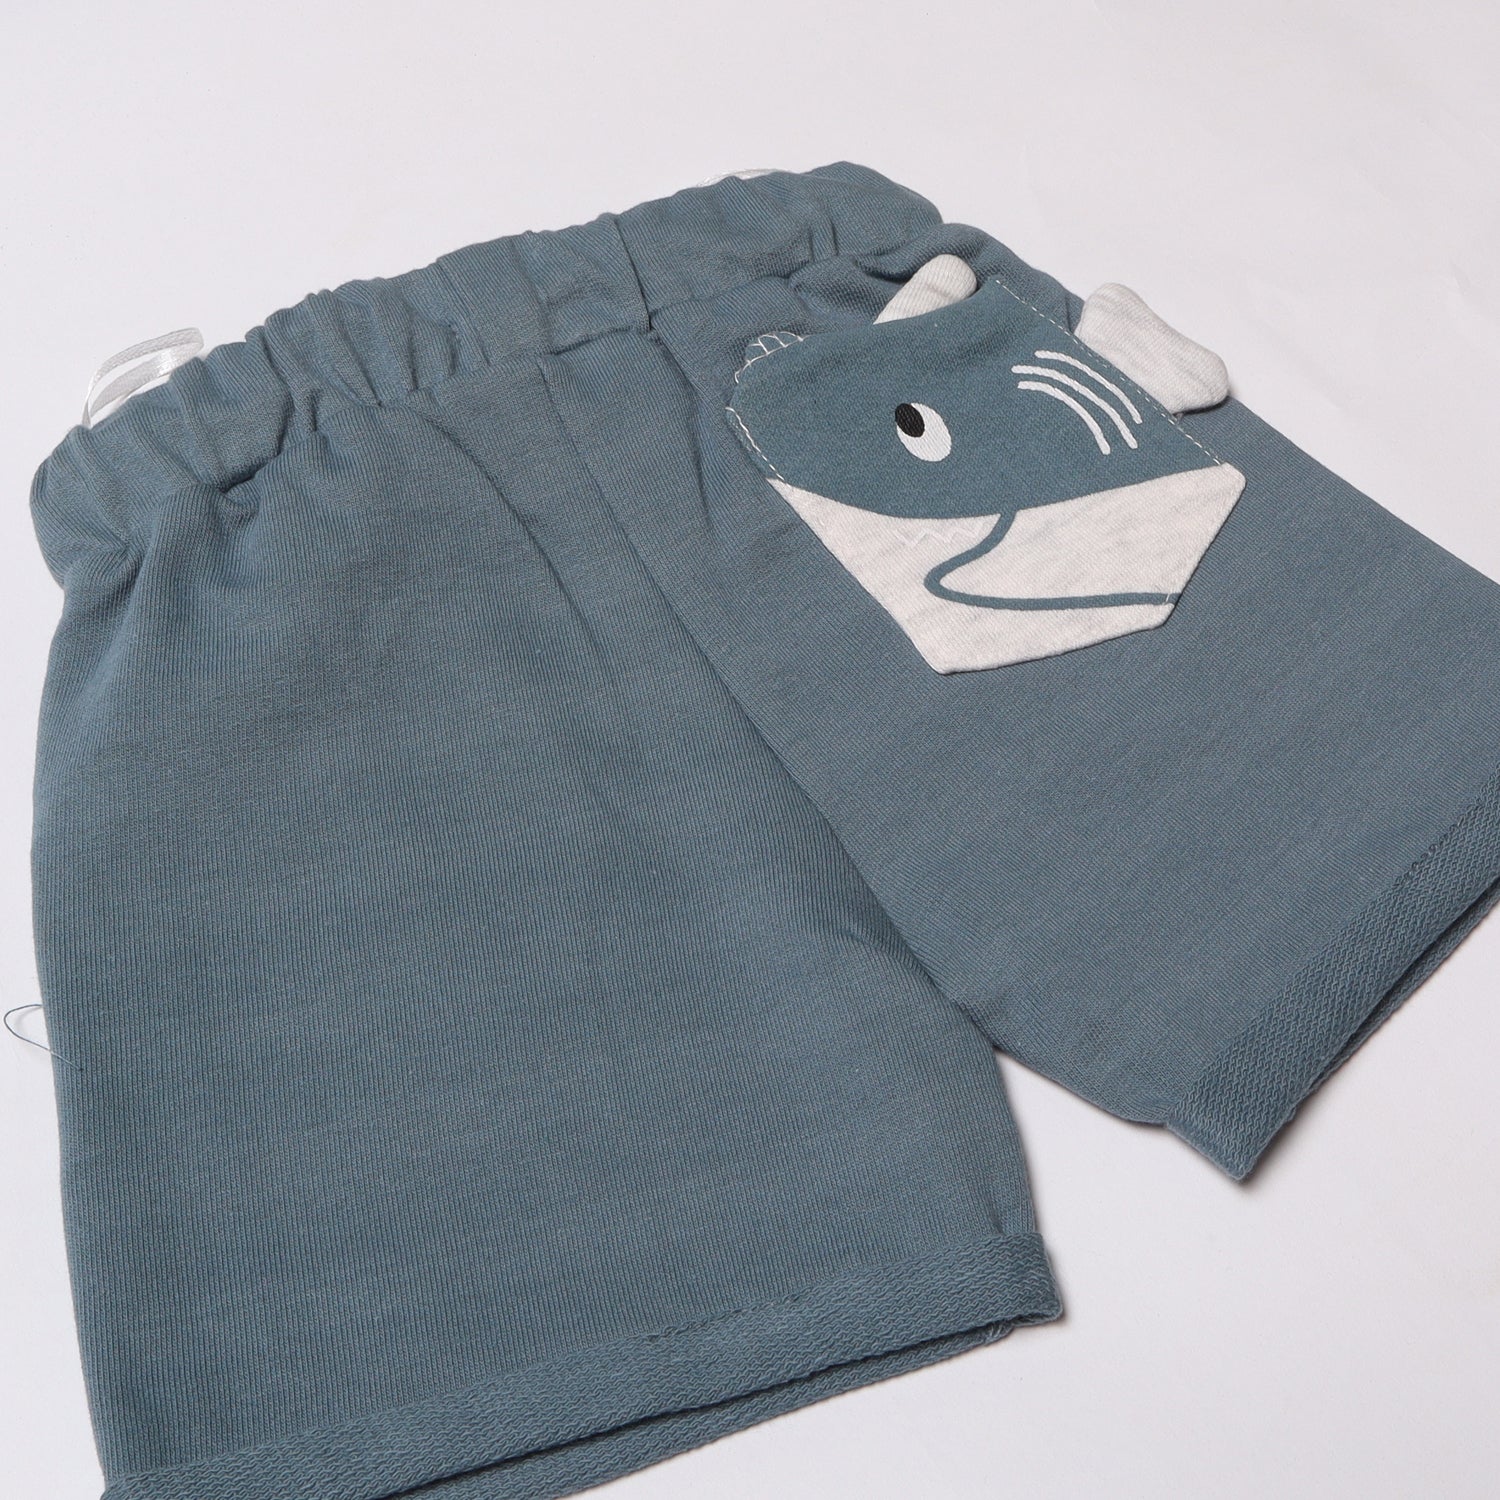 TEAL BLUE DOUBLE POCKET SAVE THE SHARKS SHORTS